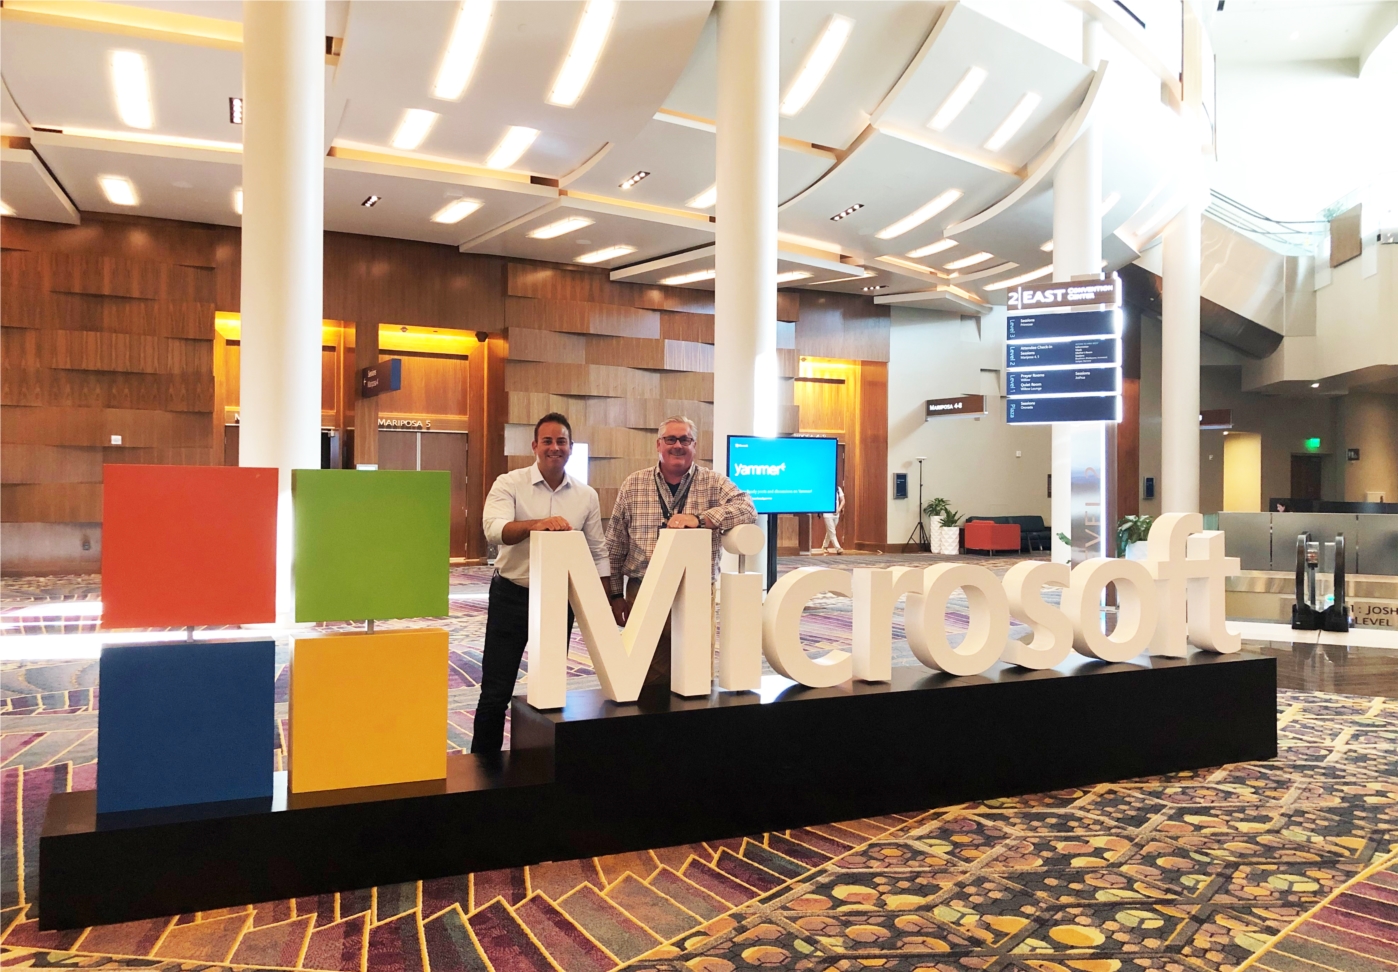 At Blue Chip, all employees are presented with ongoing learning and development opportunities, including industry conferences. Pictured here are two employees at Microsoft's 2019 partner conference, Microsoft Inspire.